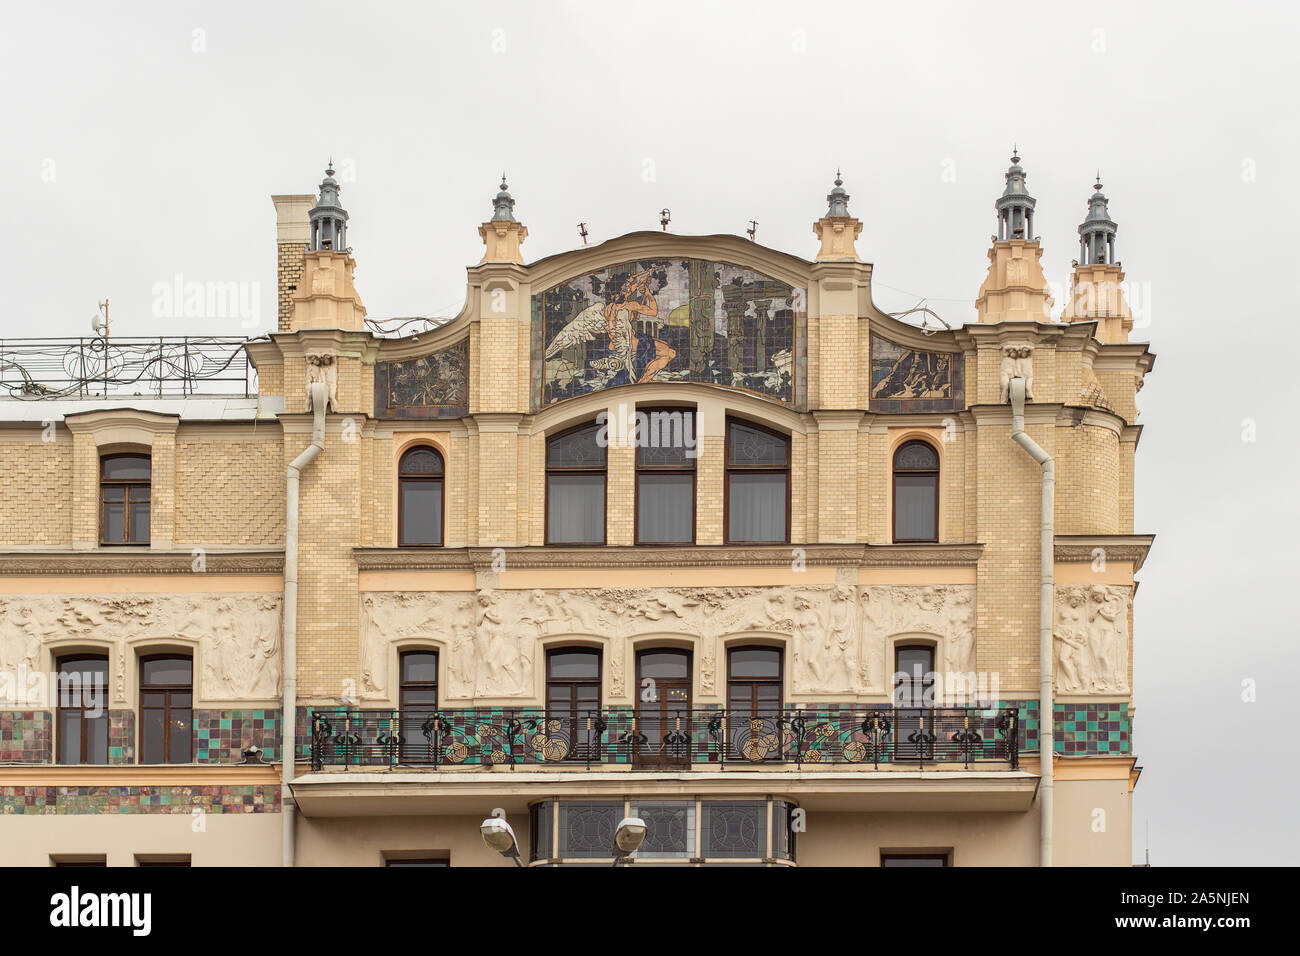 12-10-2019, Moscow, Russia. Fresco on the facade of the Metropol Hotel. Beautiful architecture historic building in the city center. Beautiful decorat Stock Photo